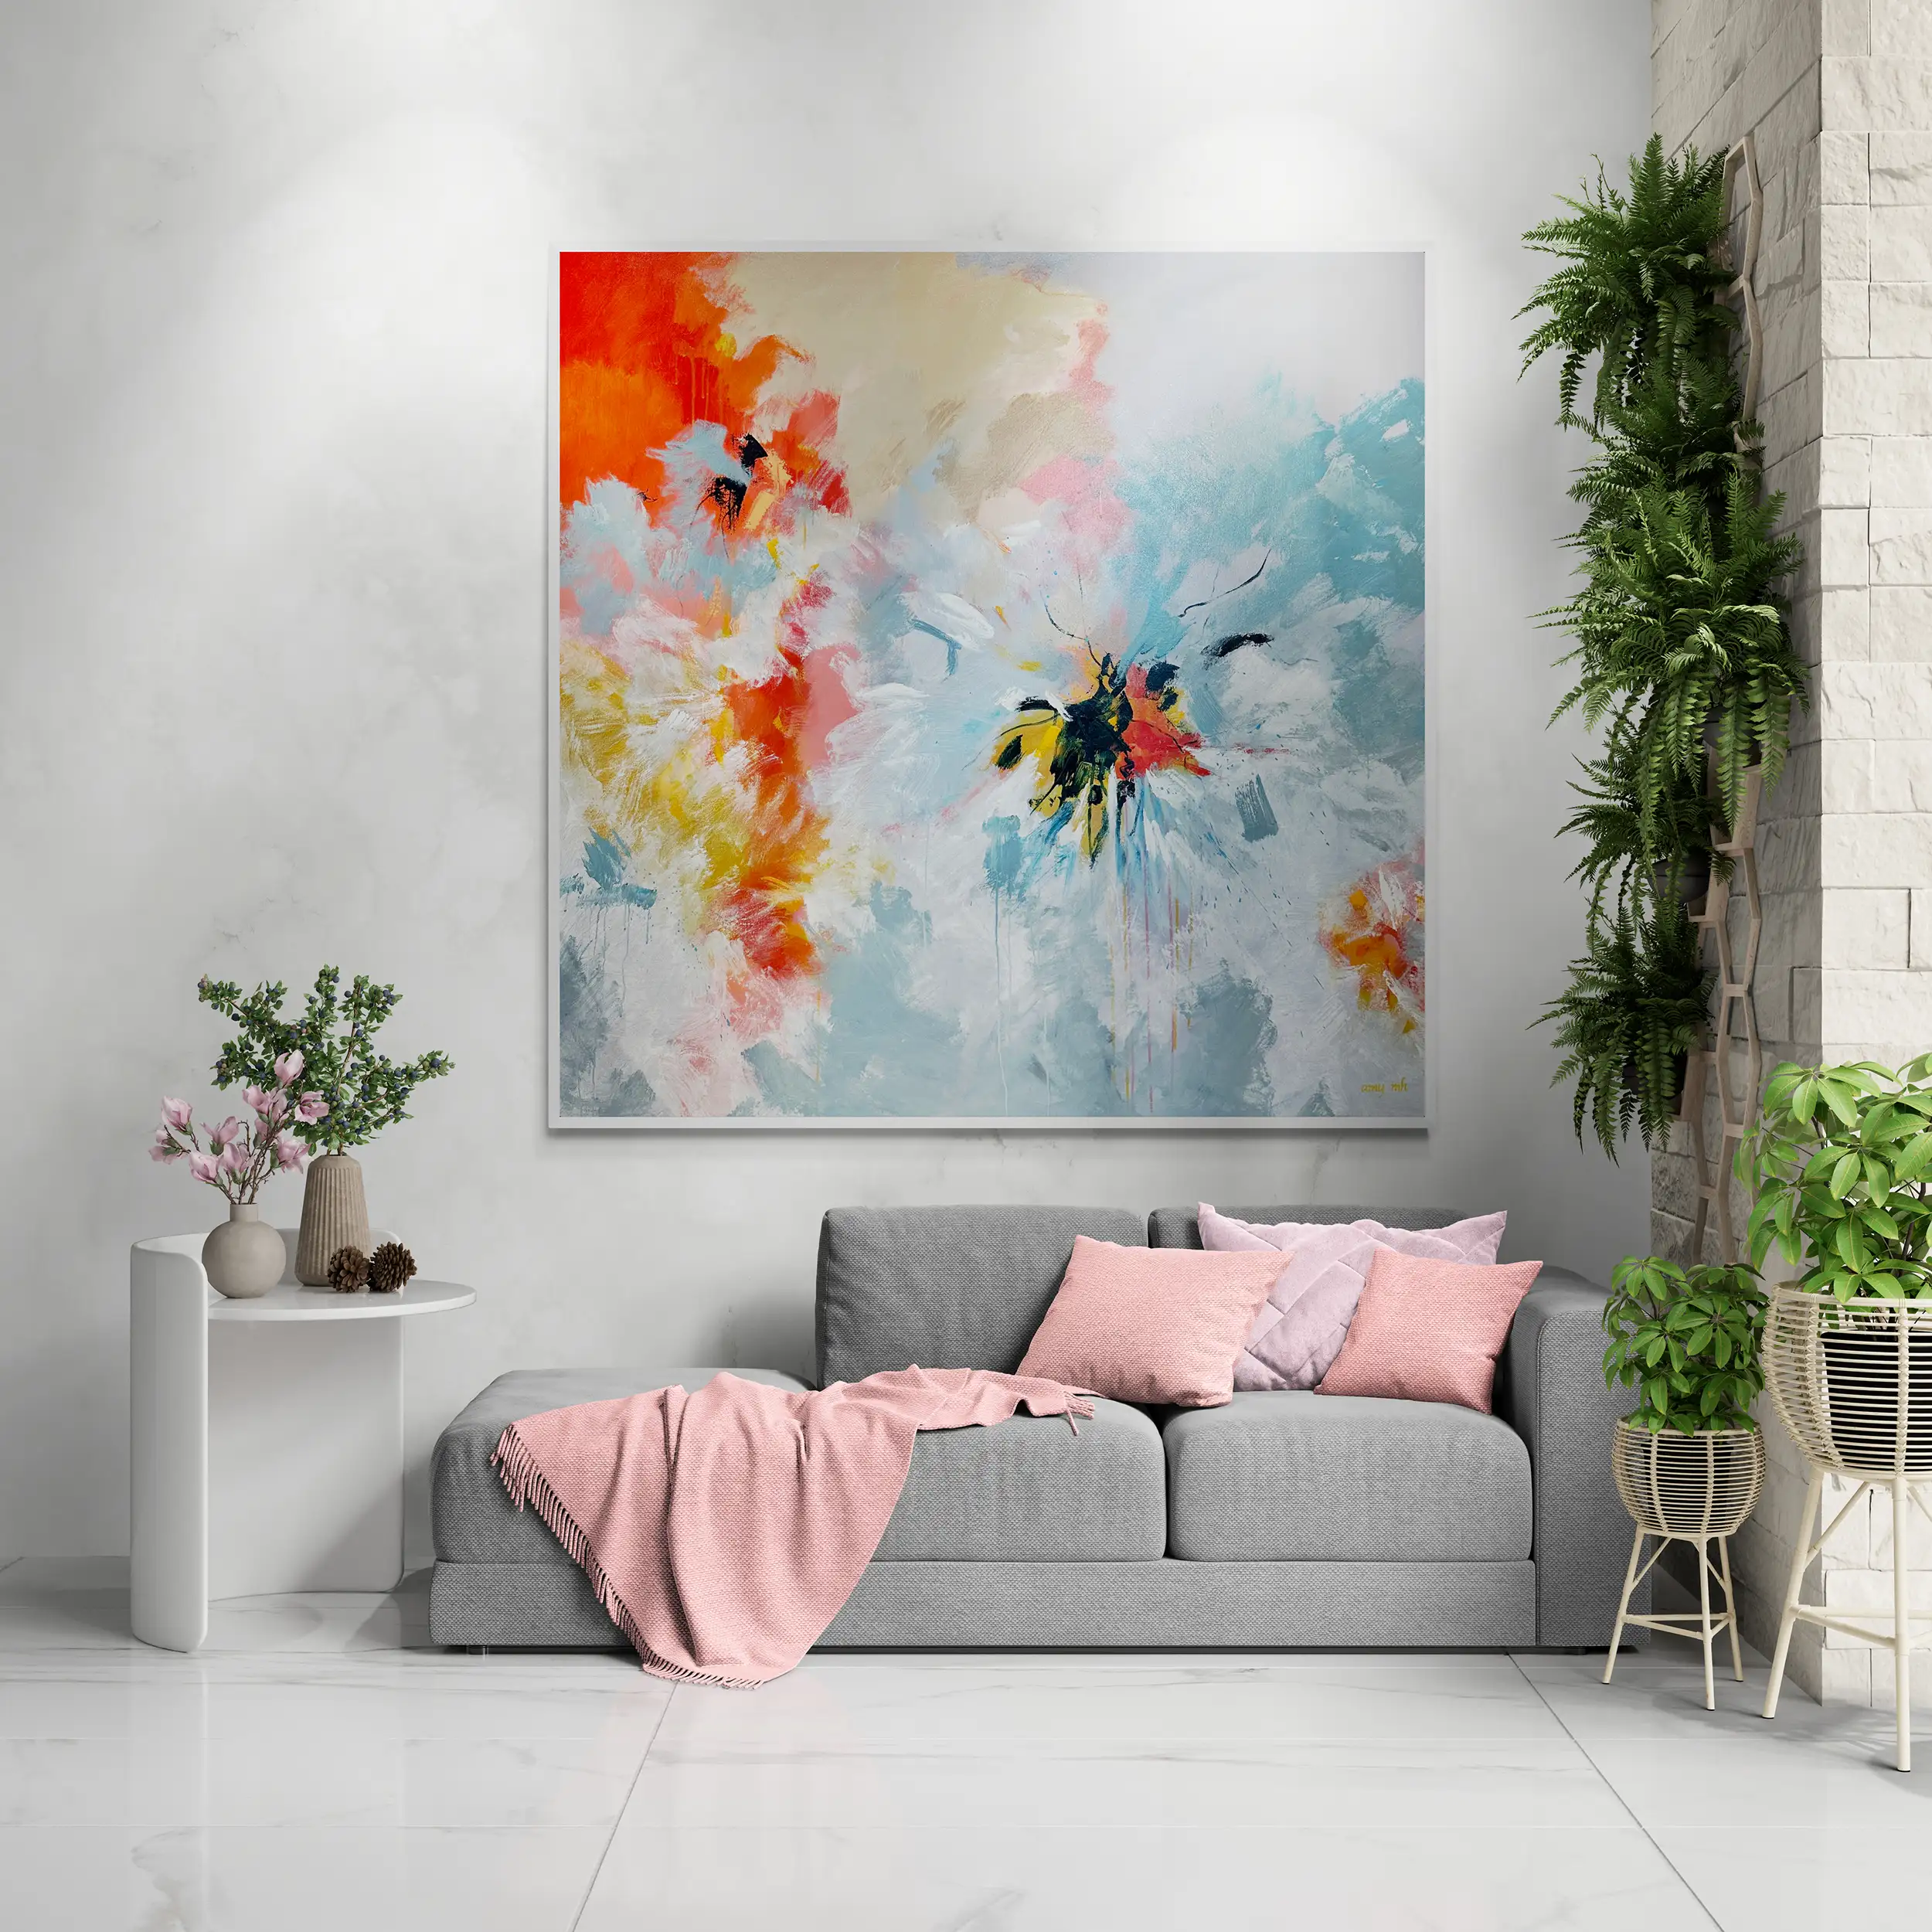 Naples Art abstracts painting 